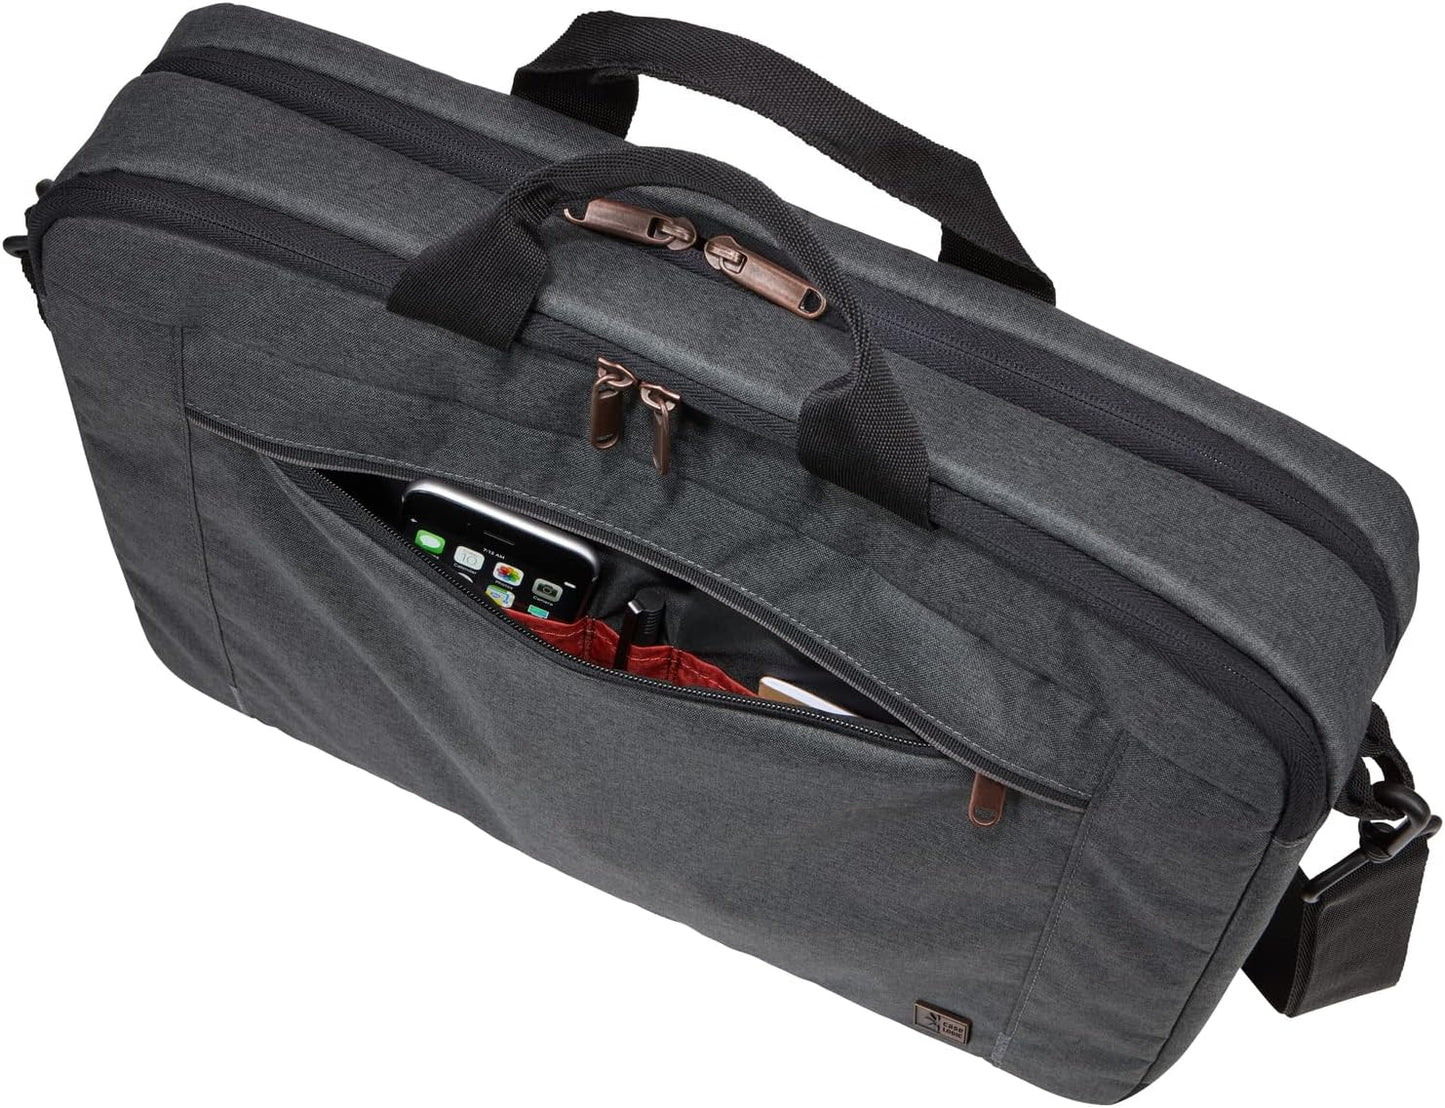 Case Logic Era Carrying Case for 15.6" Notebook, Tablet PC, File, Book, Headphone - Obsidian